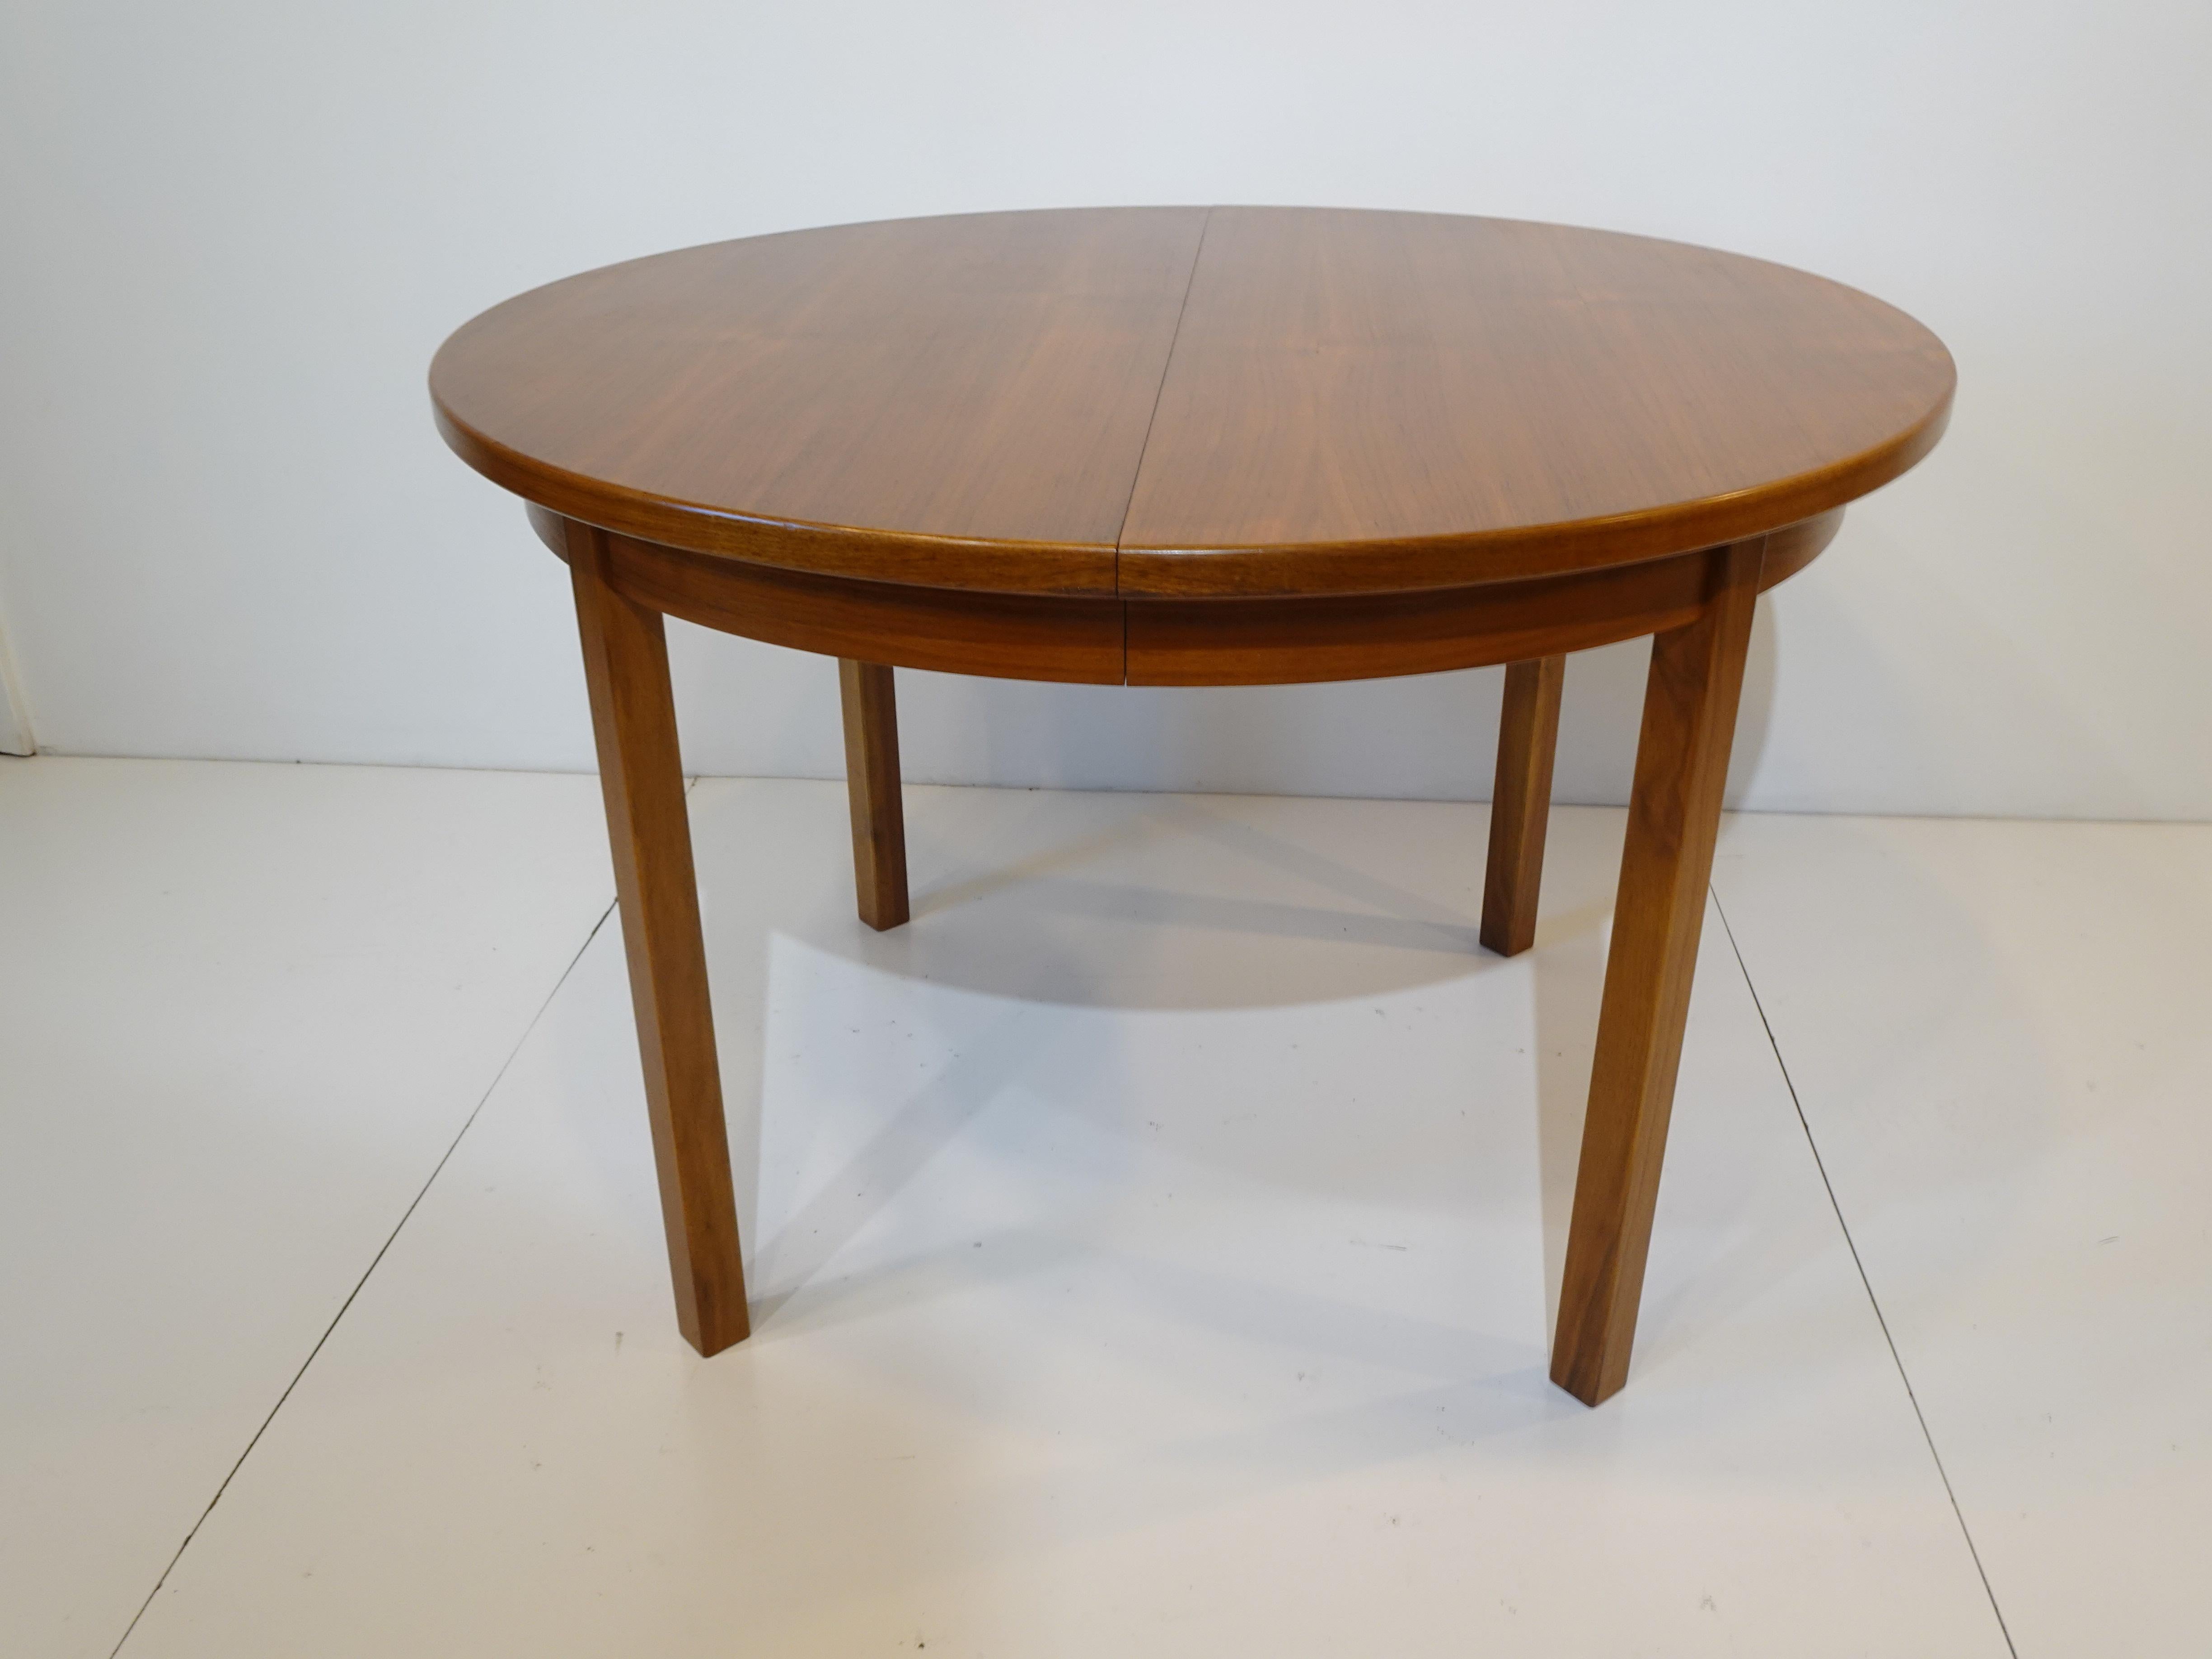 A walnut dining table with two folding leaves that can be stored under the top in a special built in holder, when used without the leaves it a round 43.13